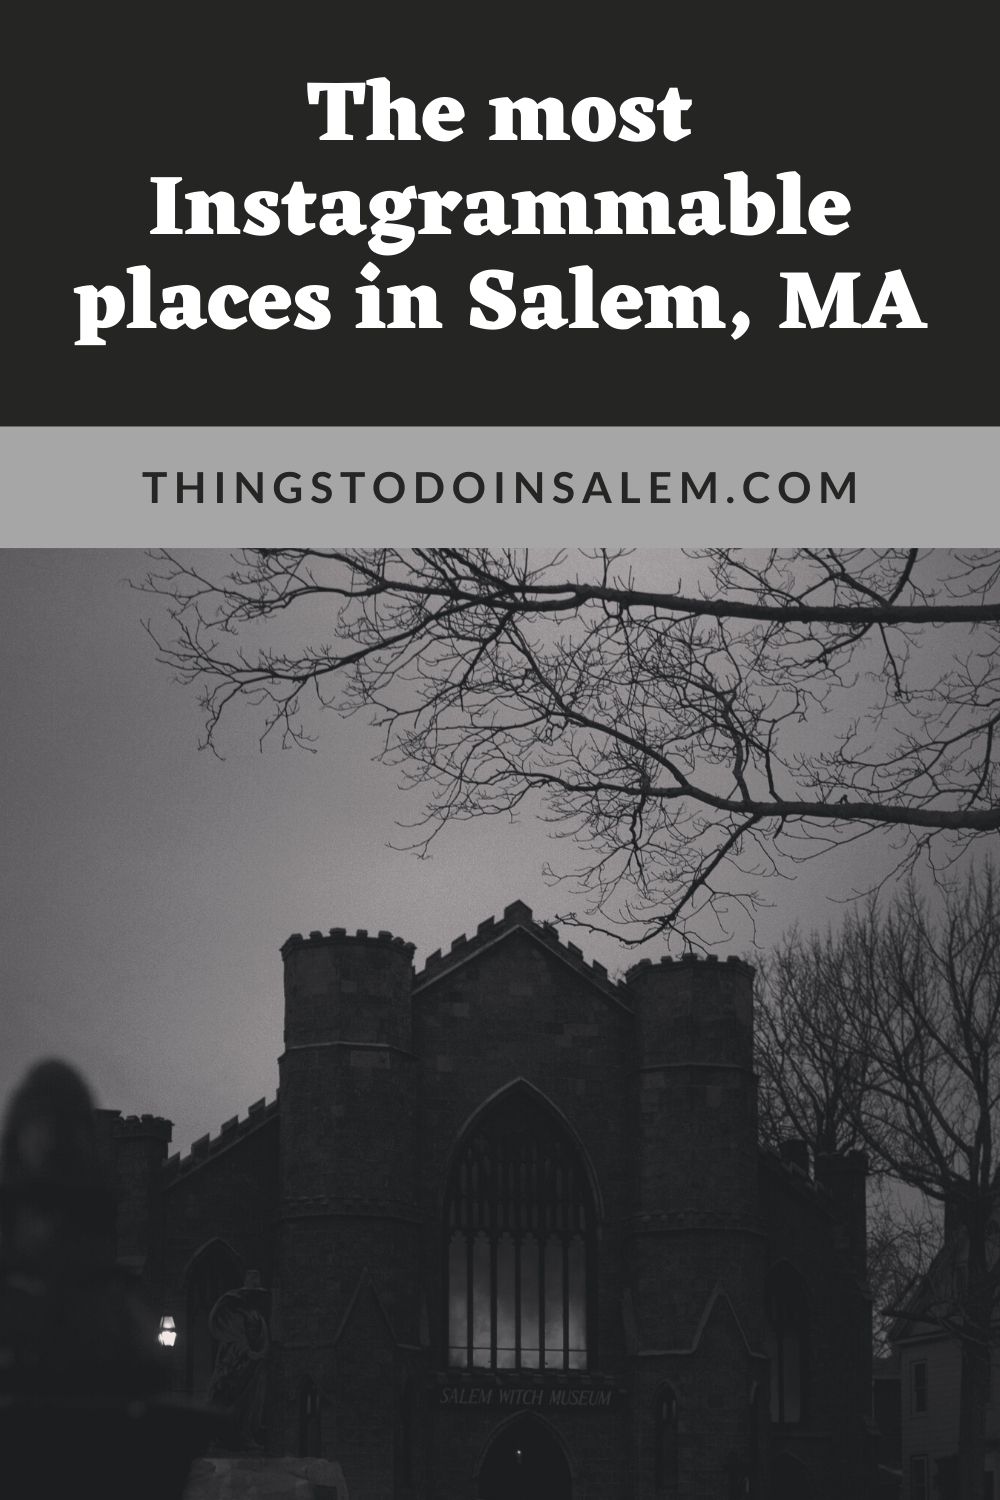 things to do in salem, most instagrammable places in salem ma